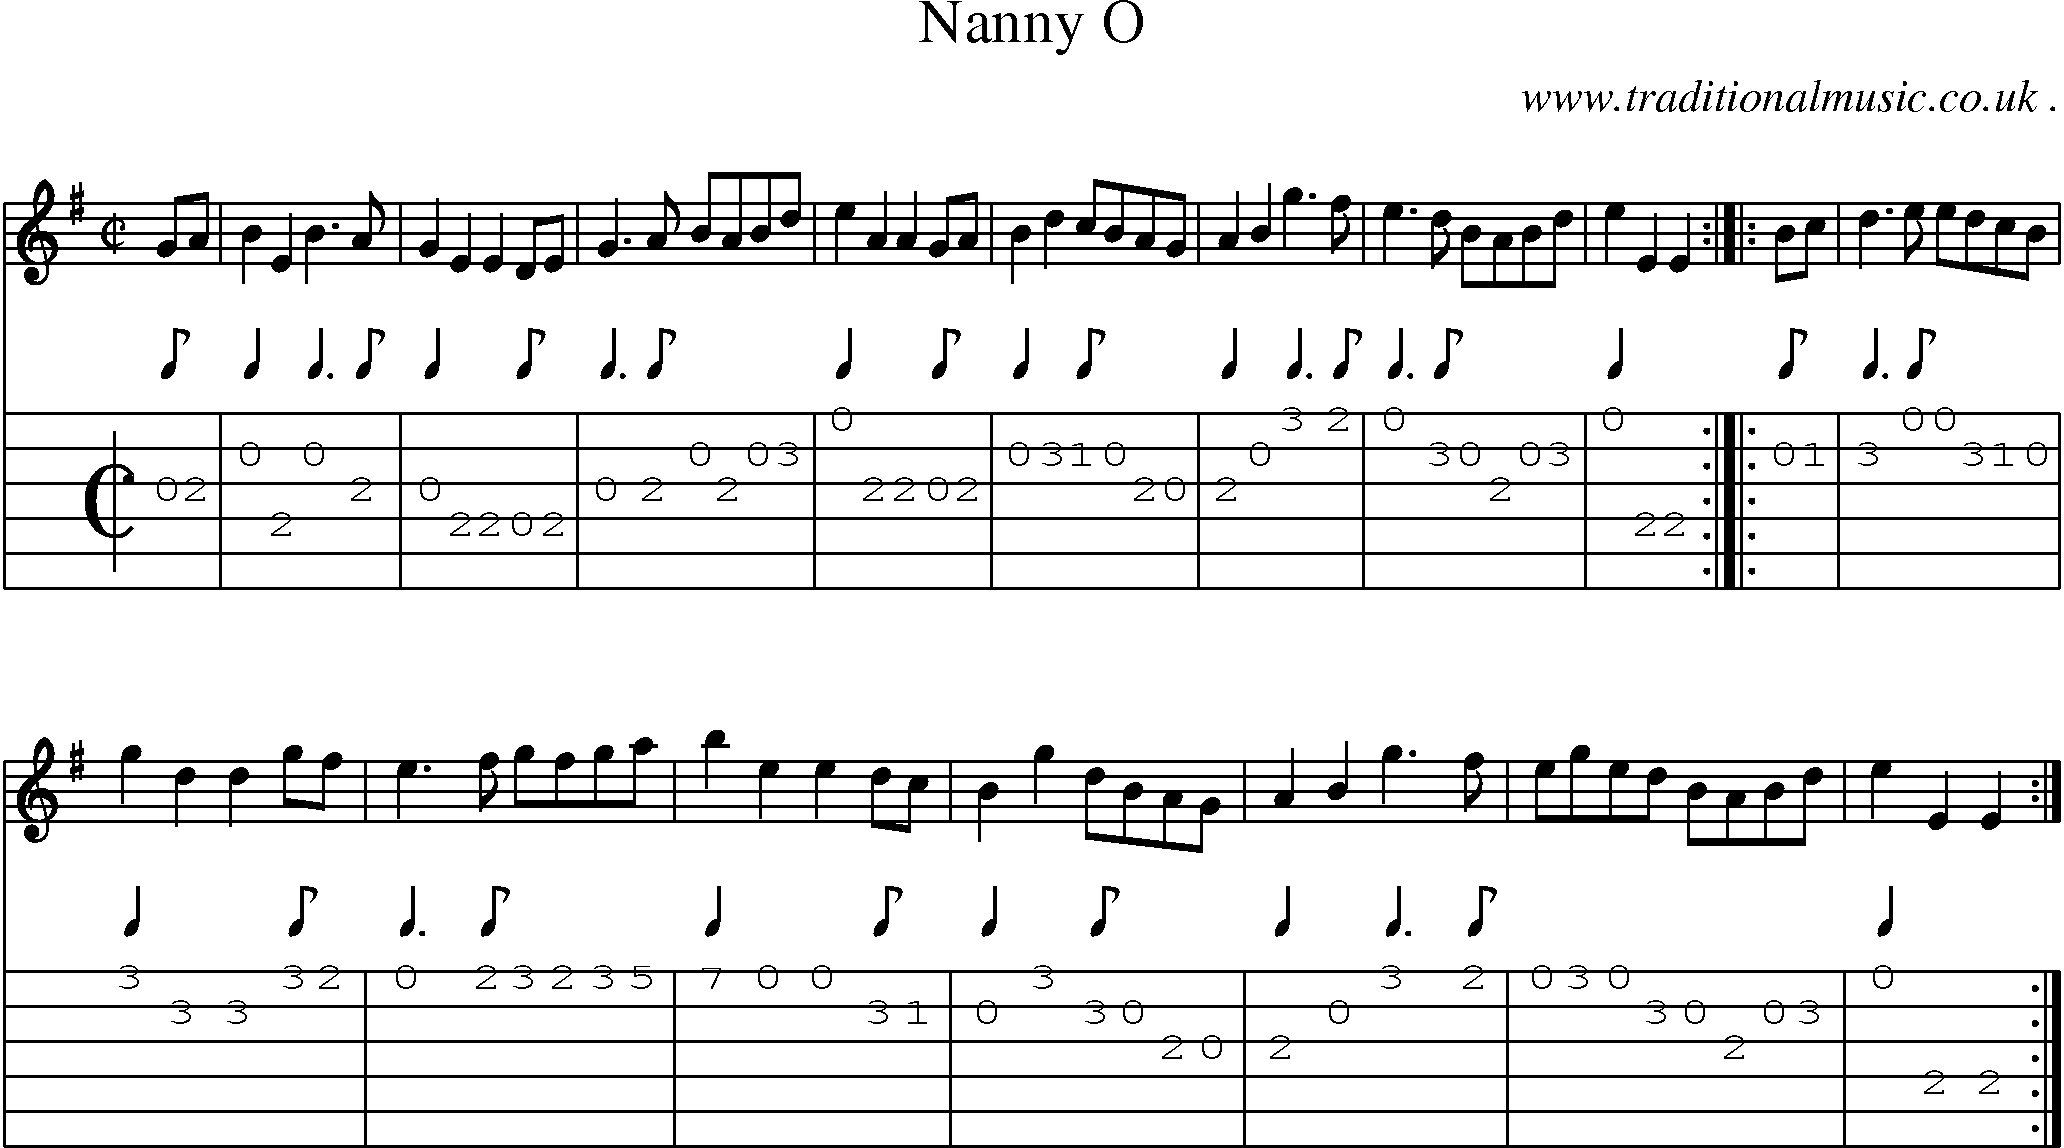 Sheet-Music and Guitar Tabs for Nanny O